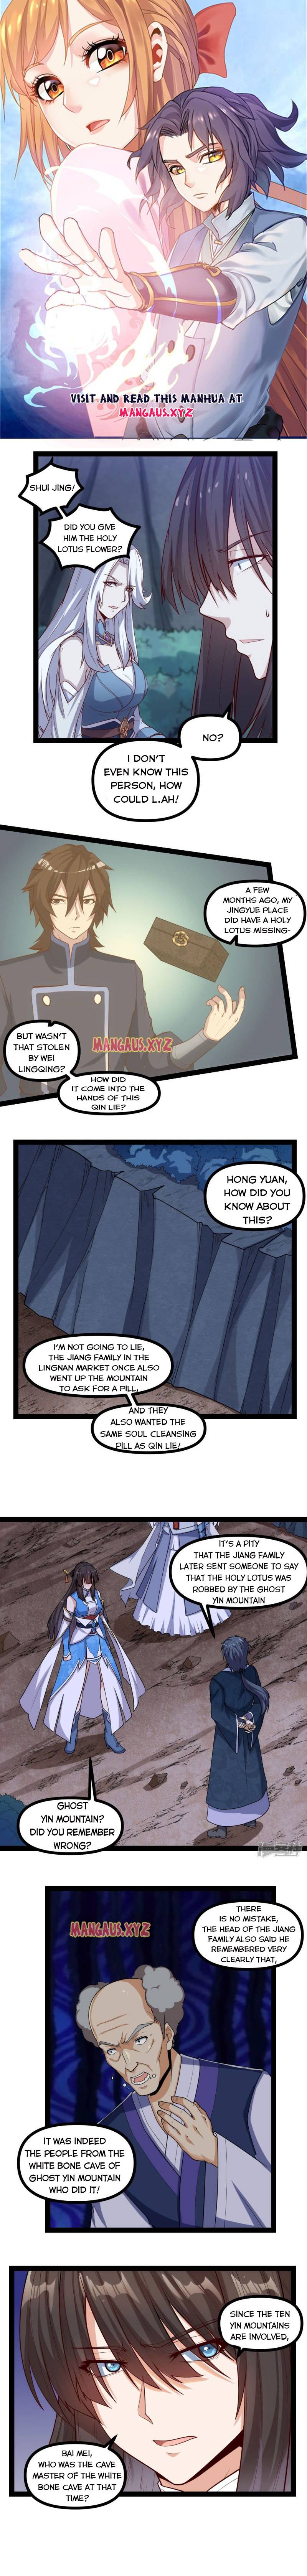 Trample On The River Of Immortality - Page 1